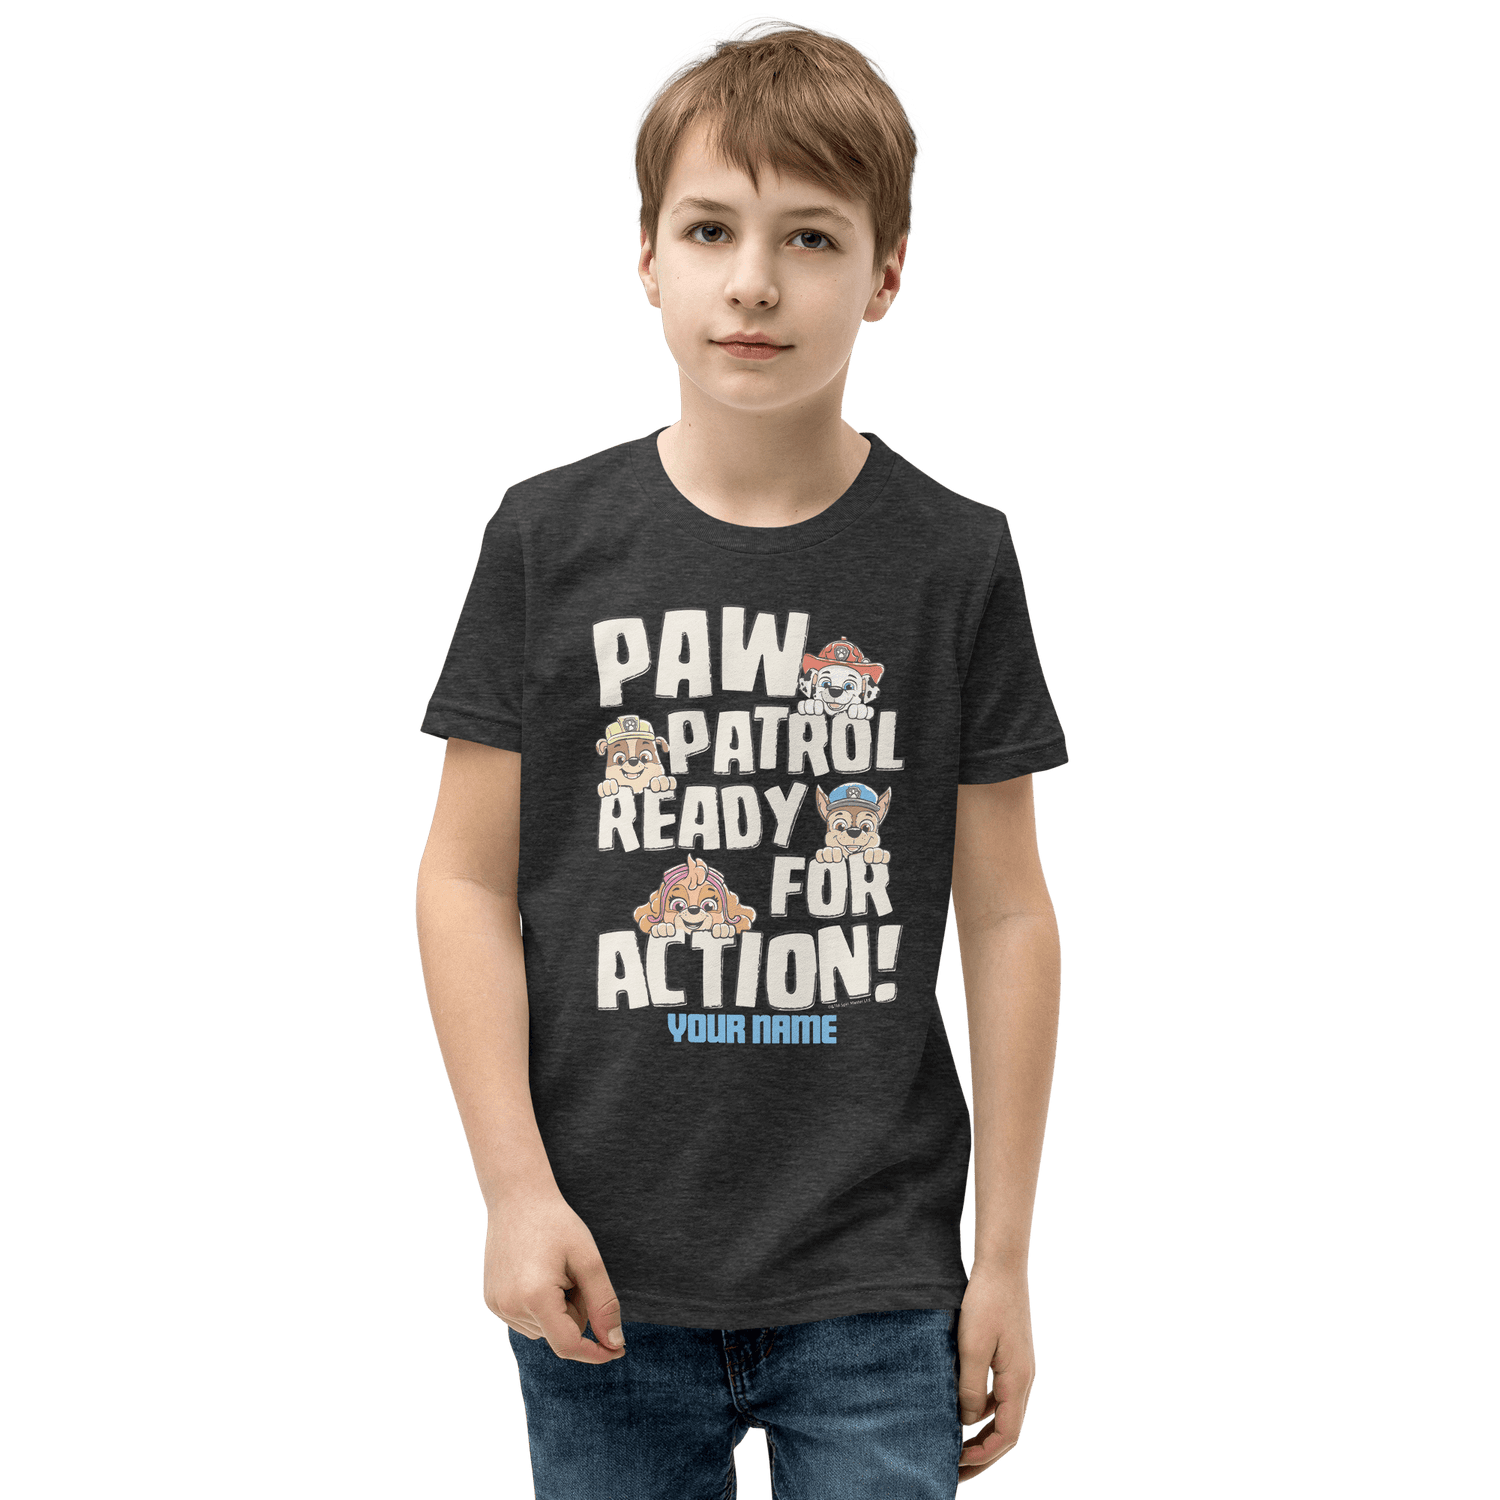 PAW Patrol Ready For Action Personalized Kids Premium T - Shirt - Paramount Shop